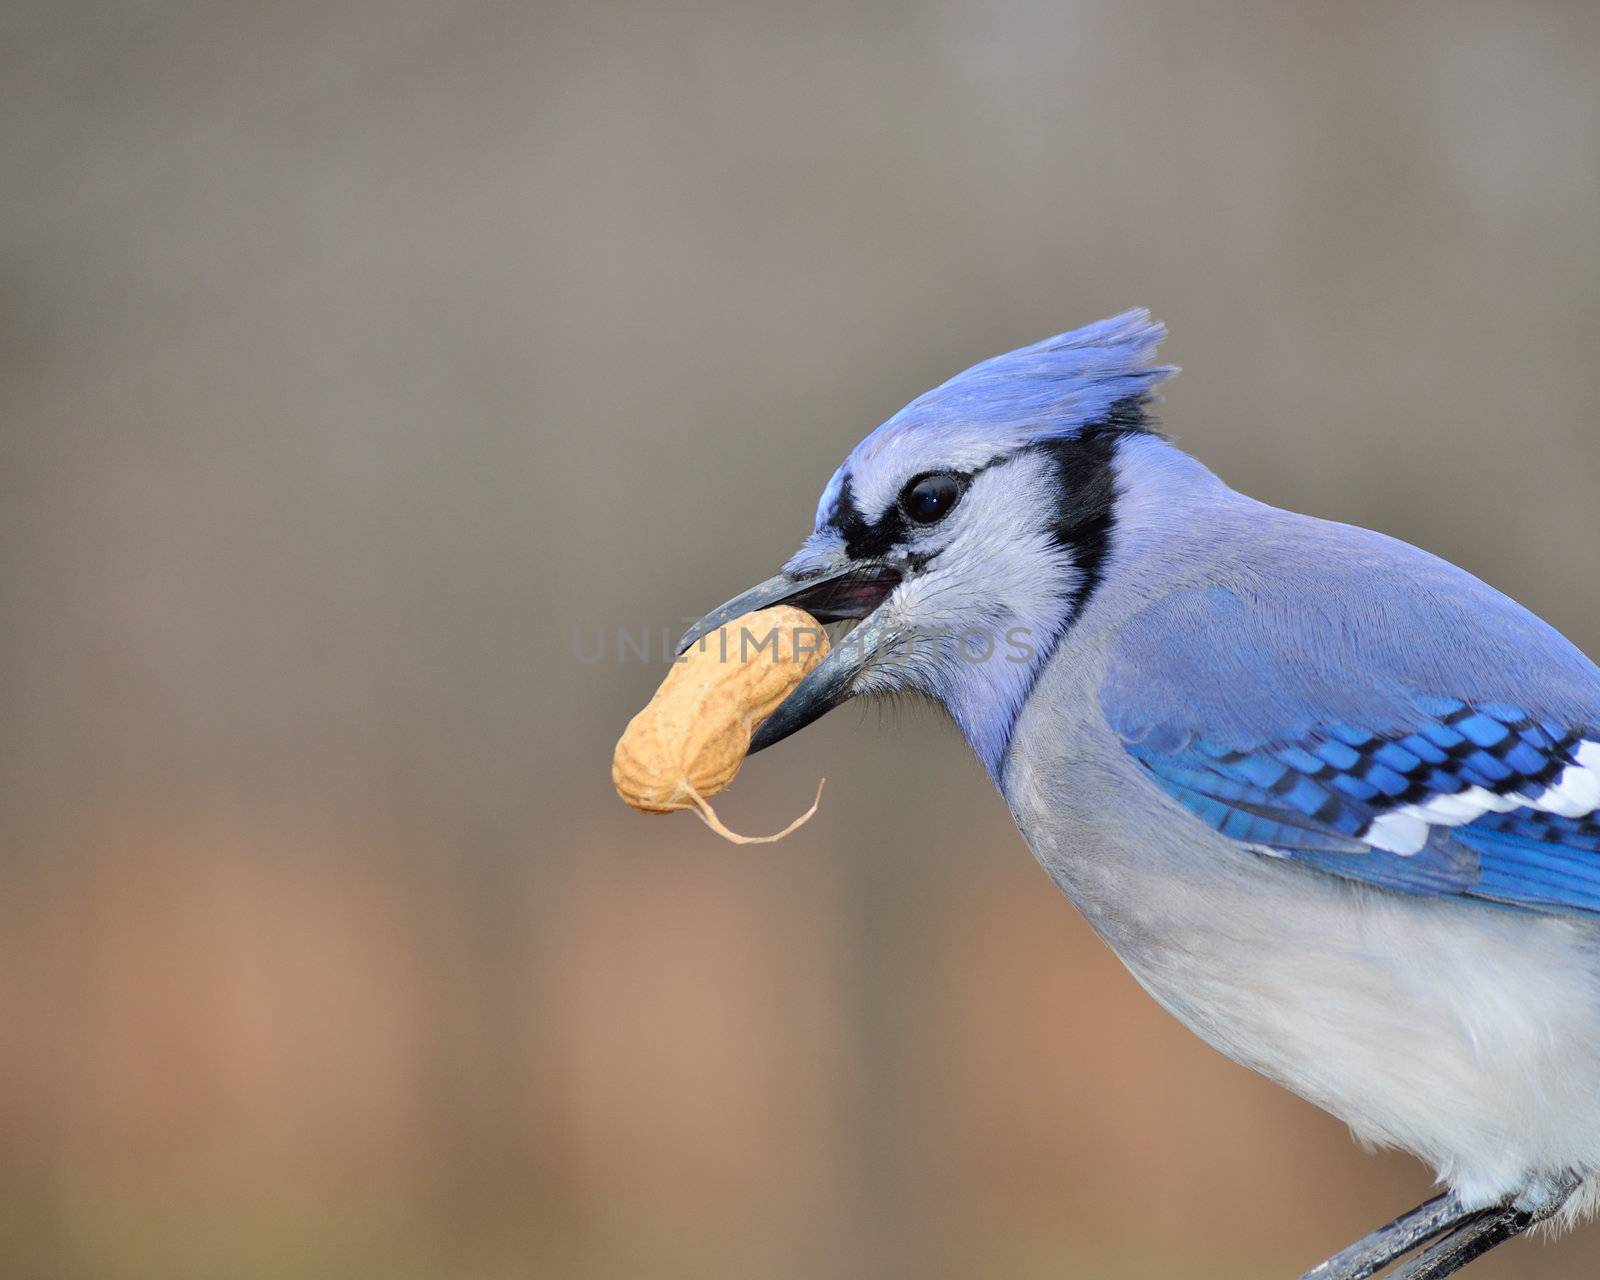 Closeup of a blue jay with a peanut in his beak.